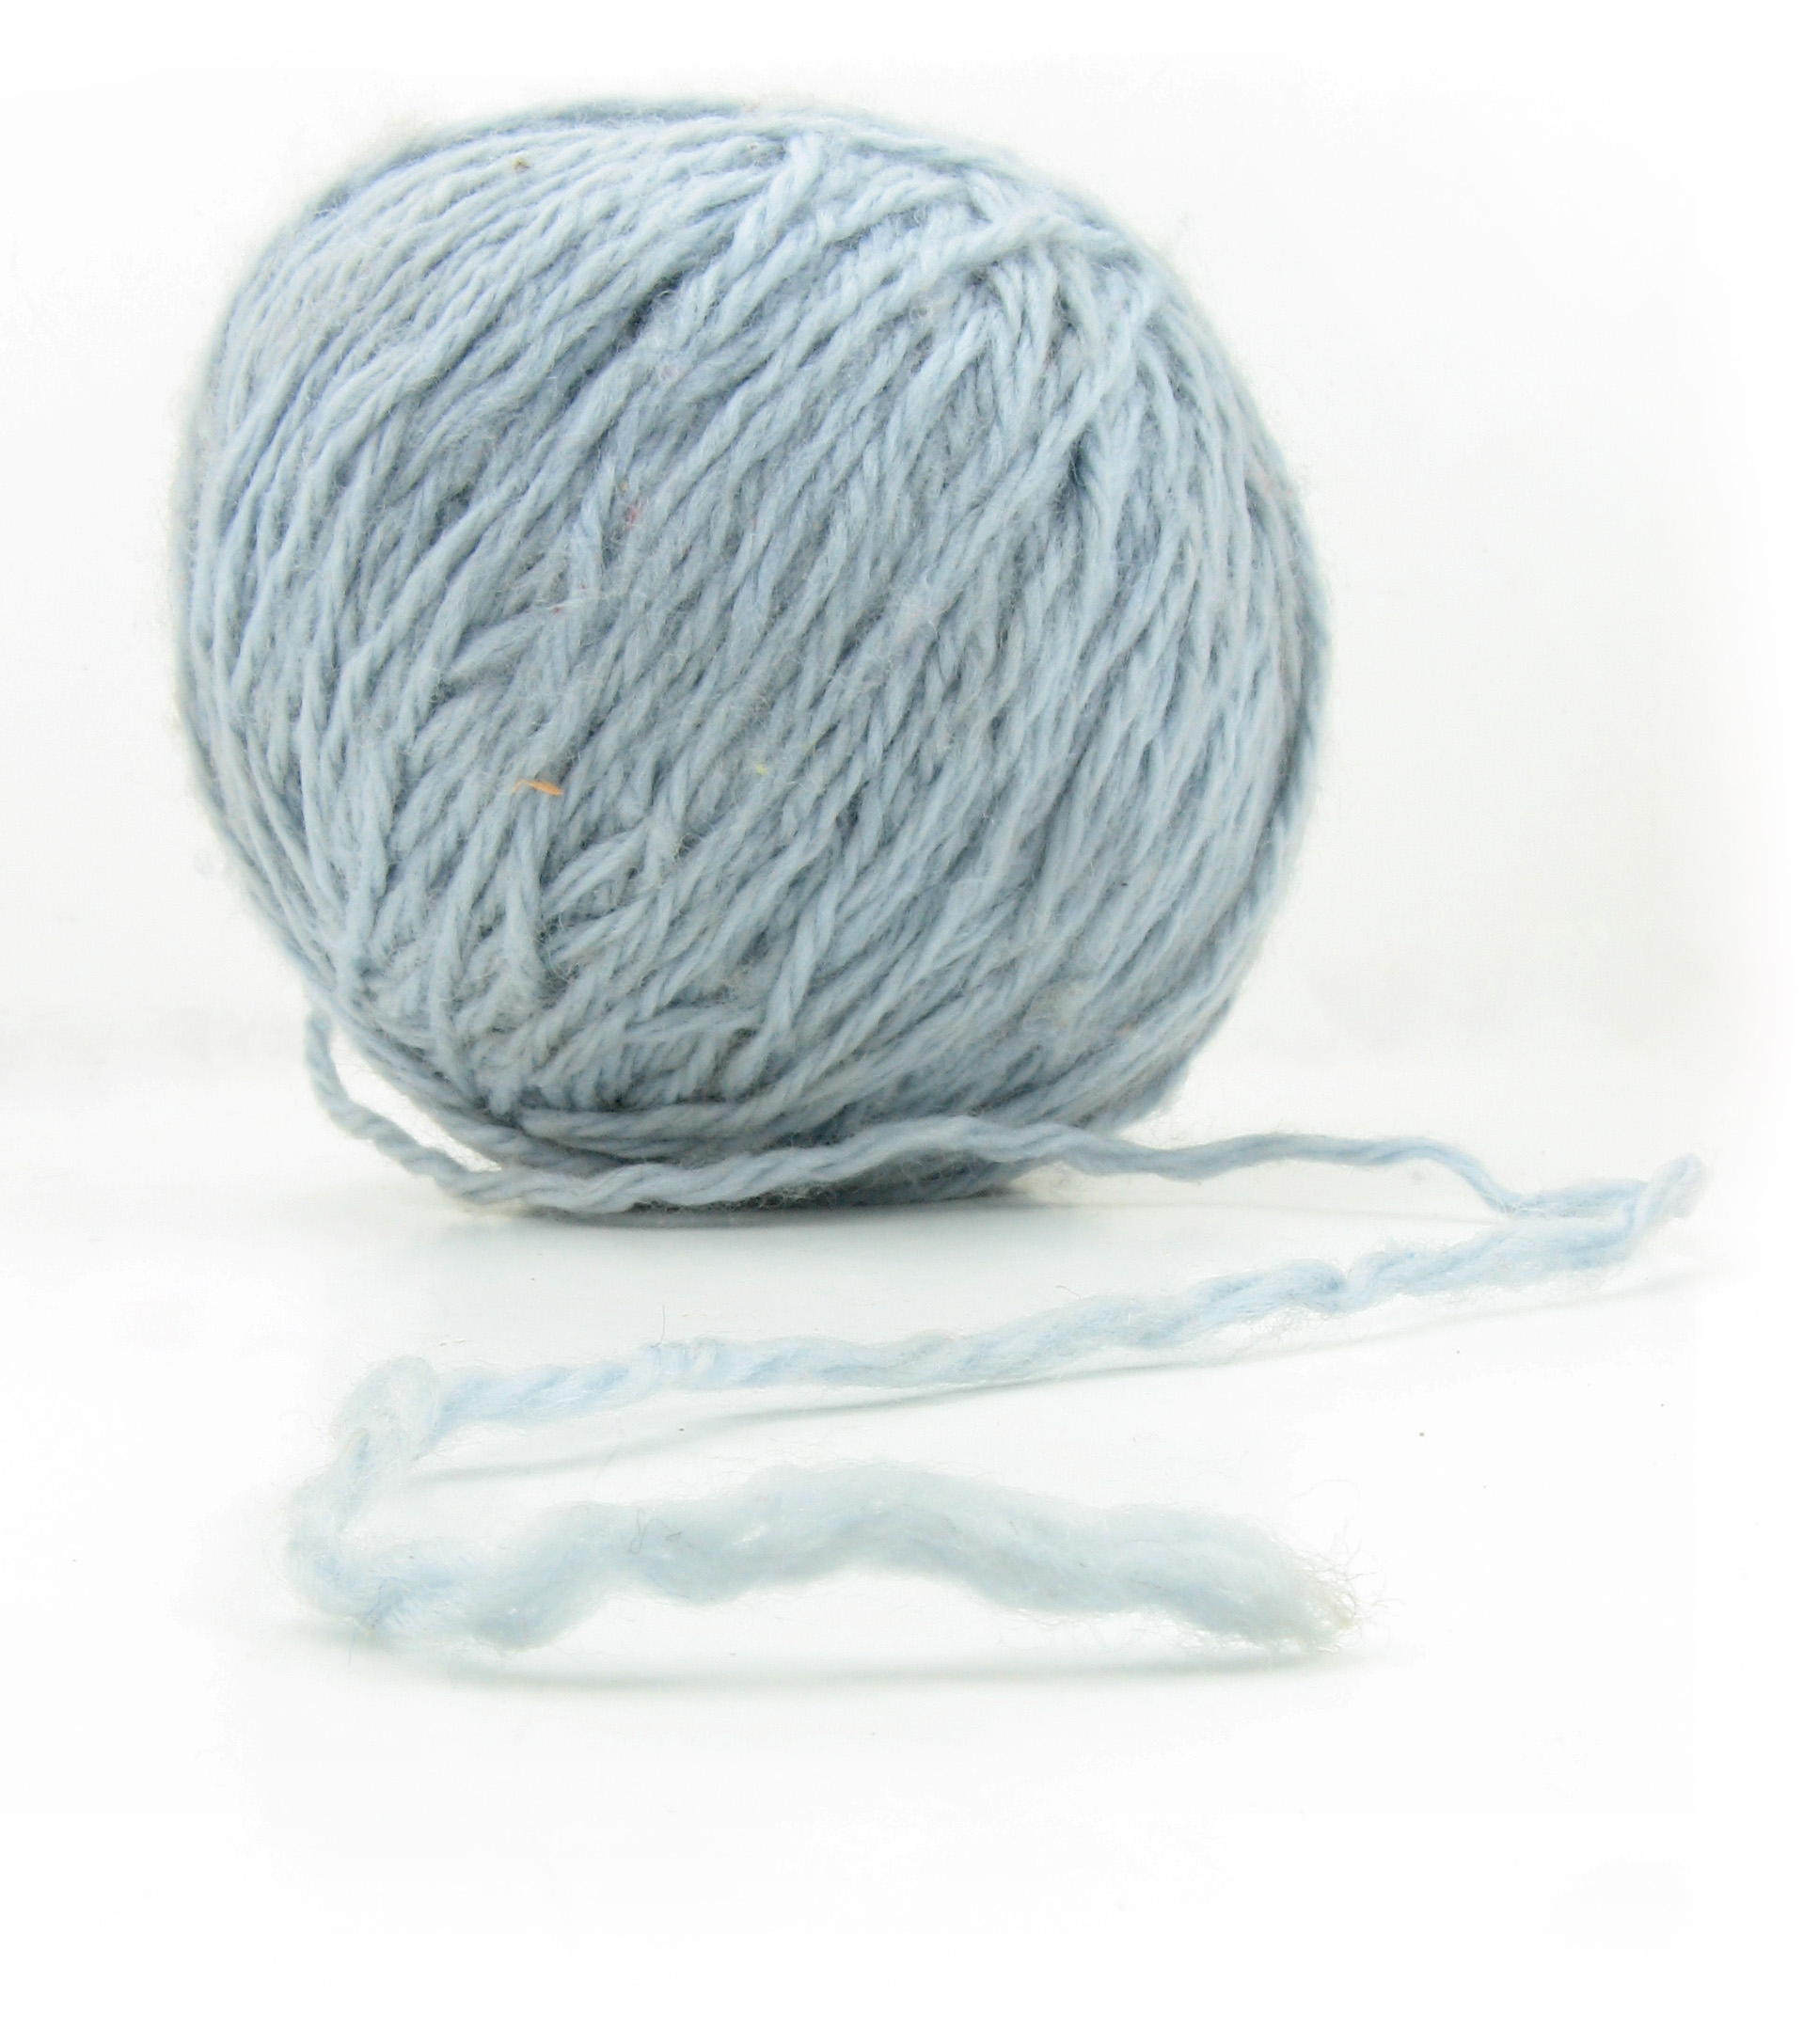 A Quick Bite » Blog Archive » Your Ball of Yarn